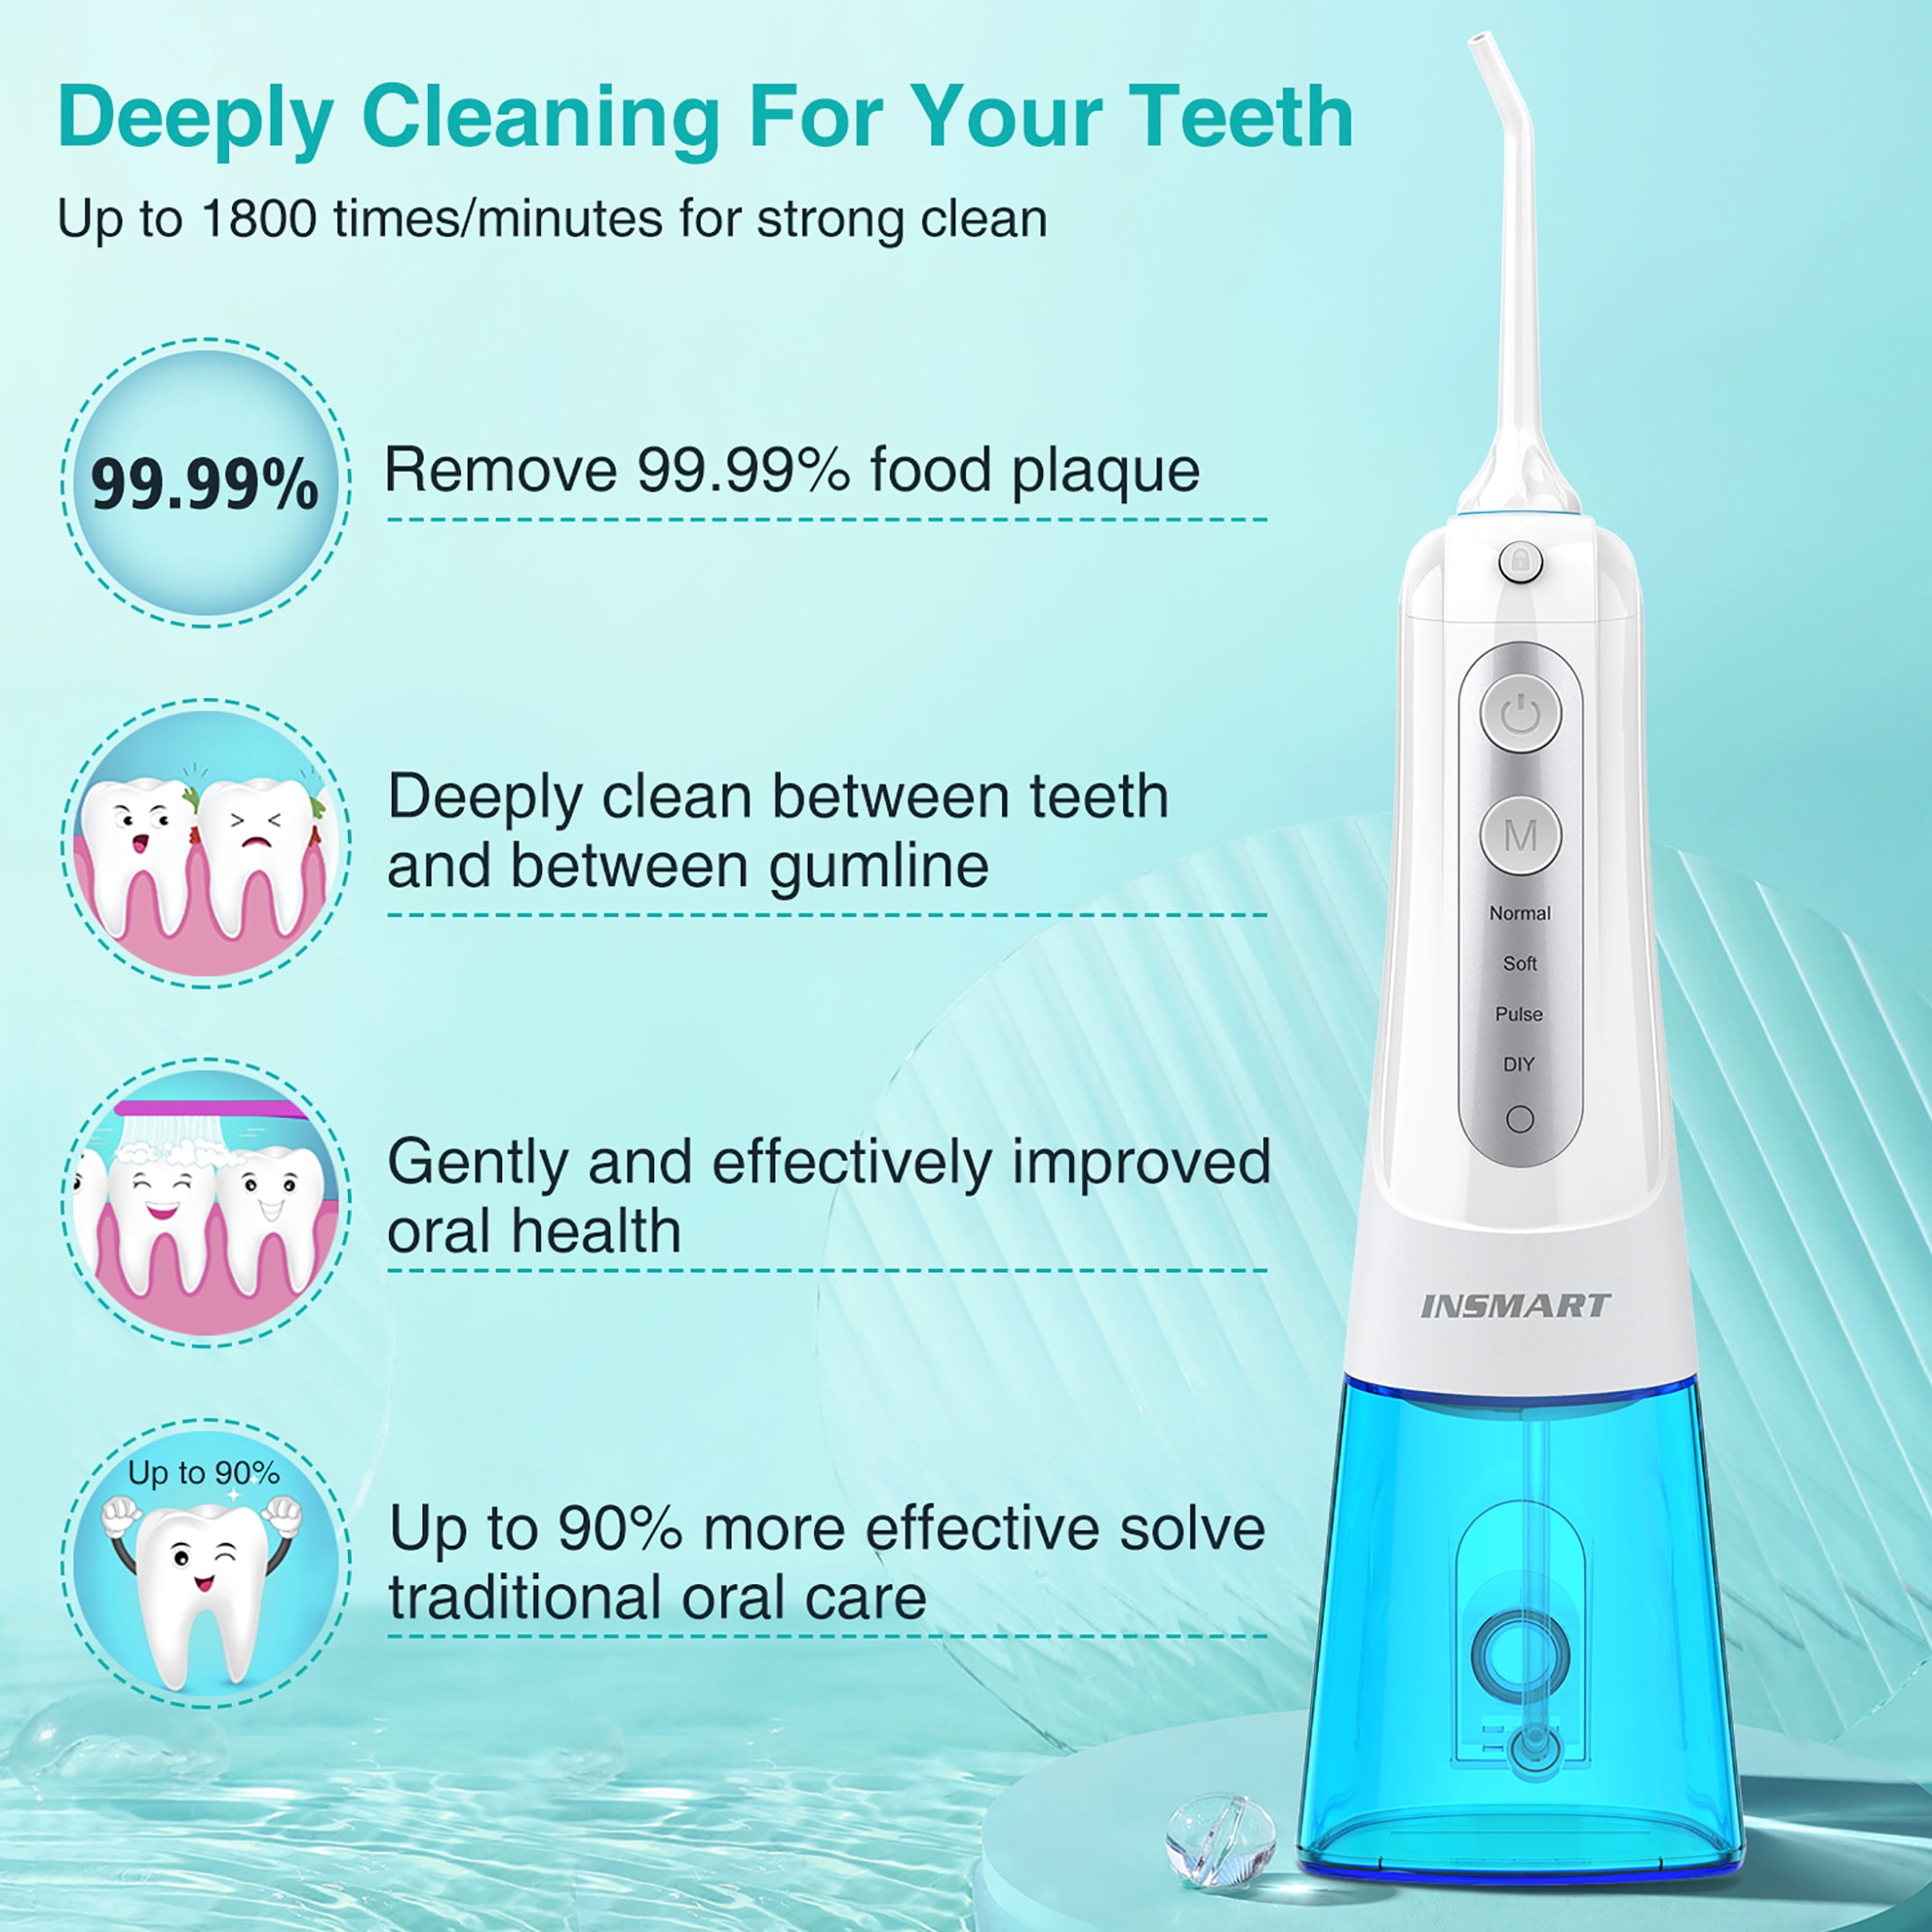 Cordless Water Dental Flosser Teeth Cleaner INSMART Professional 300ML Tank DIY Mode USB Rechargeable Dental Oral Irrigator for Home and Travel IPX7 Waterproof 4 Modes Irrigate for Oral Care 